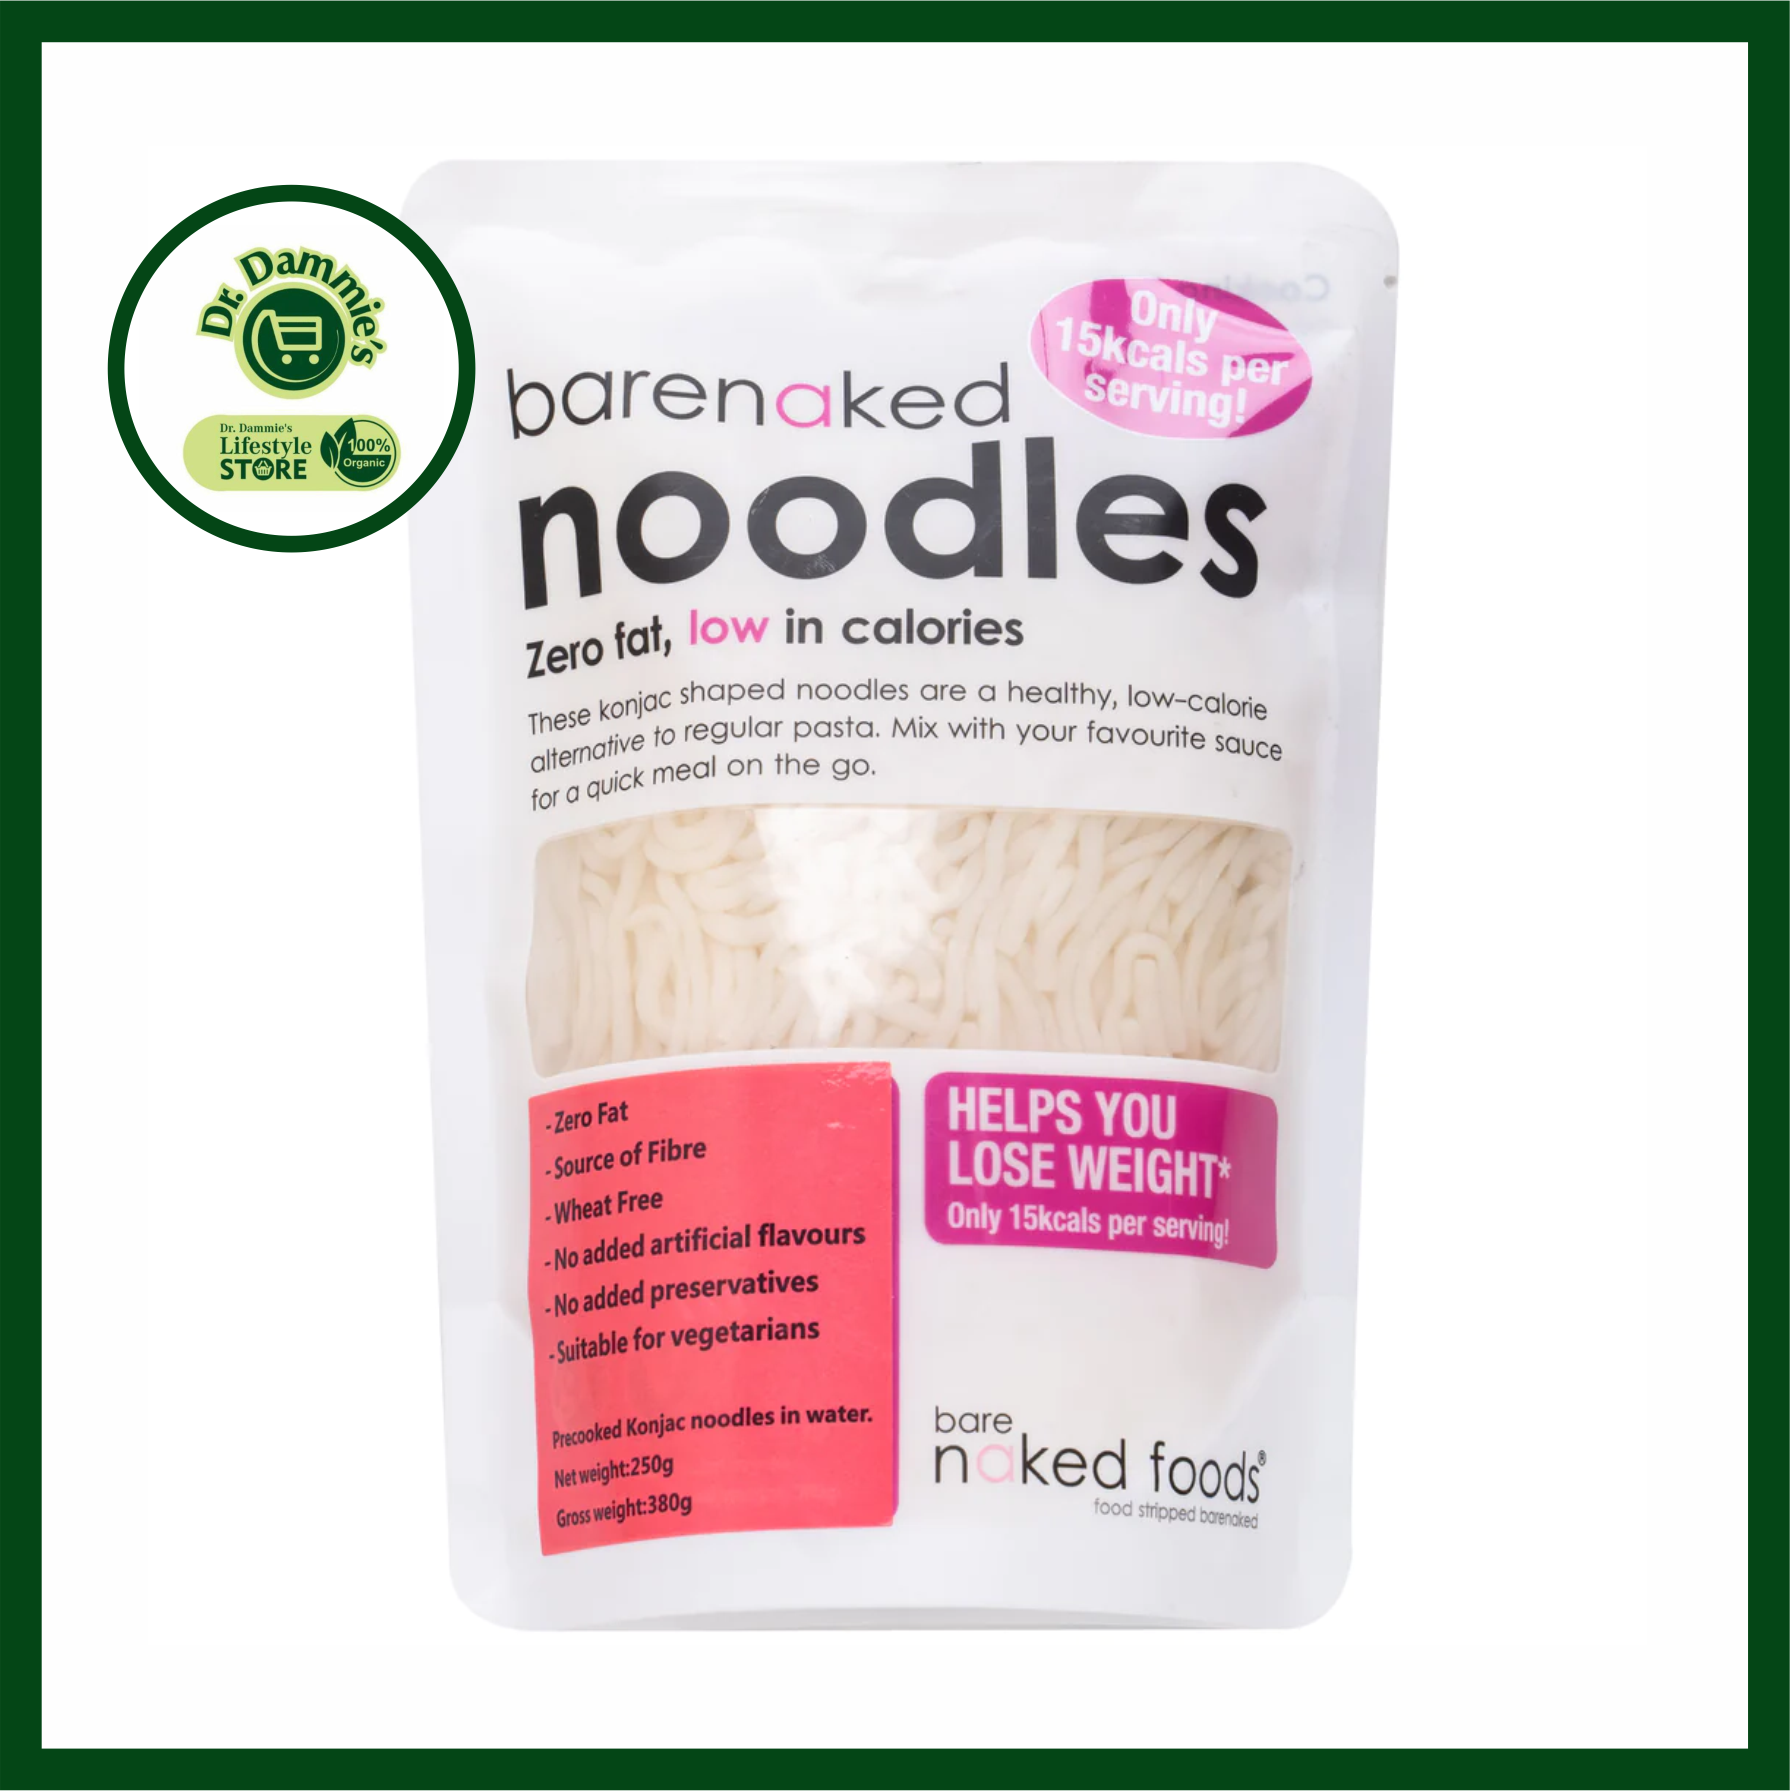 bare nacked noodles